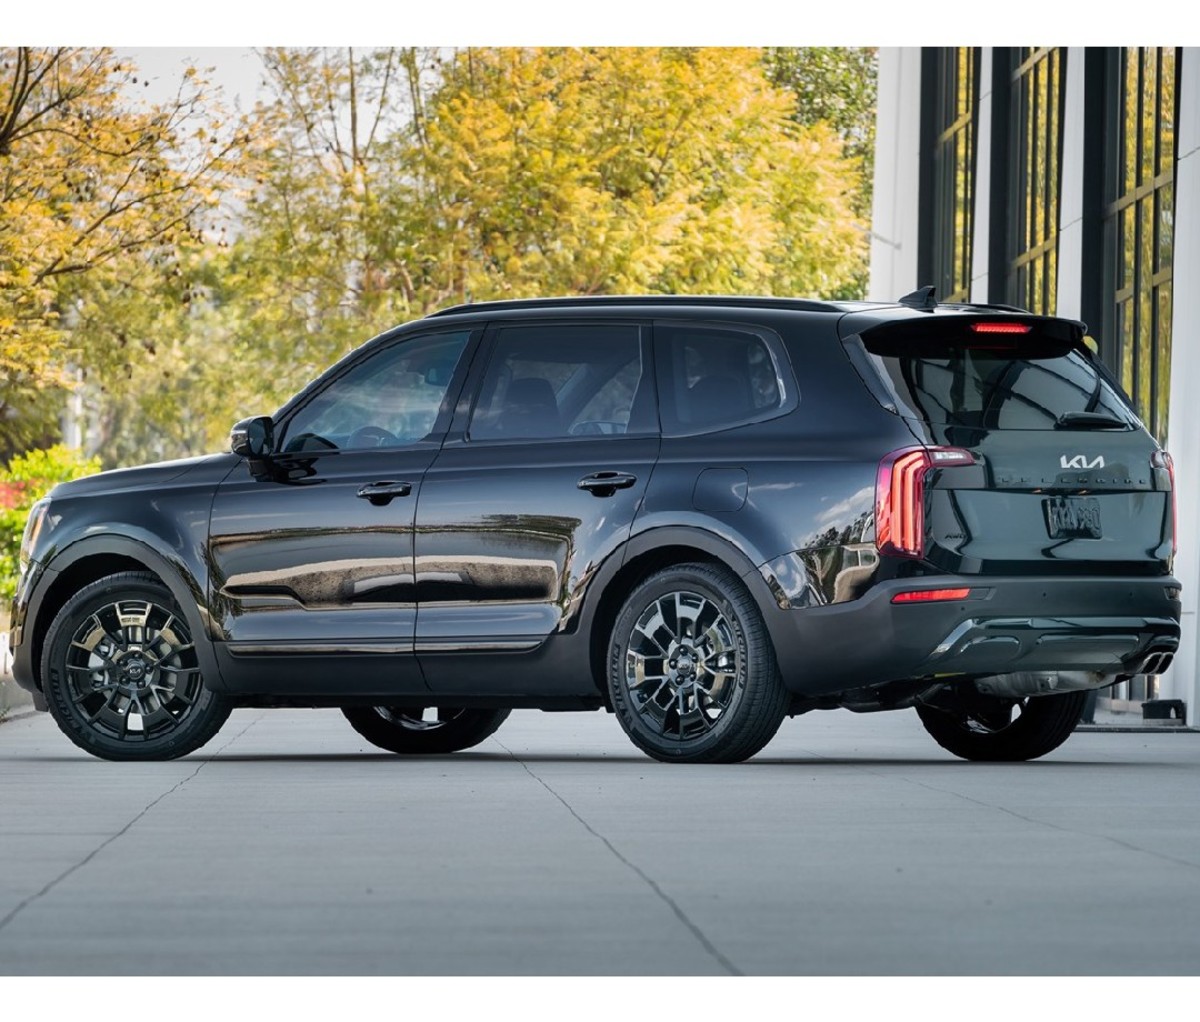 Black 2022 Kia Telluride parked beside a building with trees in the background